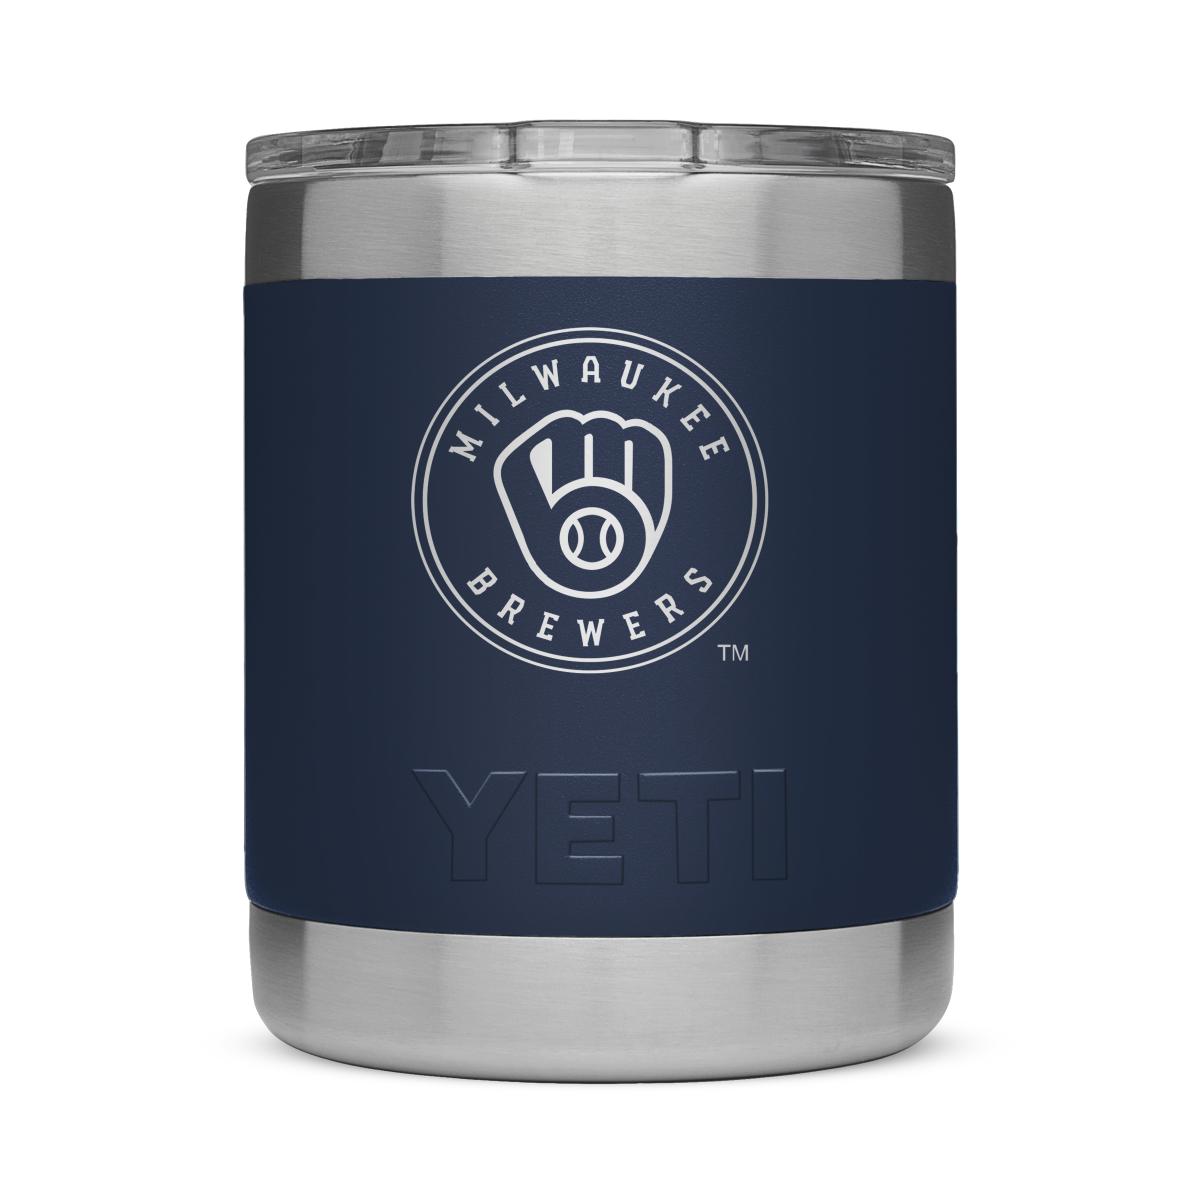 https://www.si.com/.image/t_share/MTk4ODI5MzQ4NzY0MTk4MjUx/mlb-drinkware-dealer-images-10oz-lowball-navy-milwaukee-brewers-2400x2400-200080.png